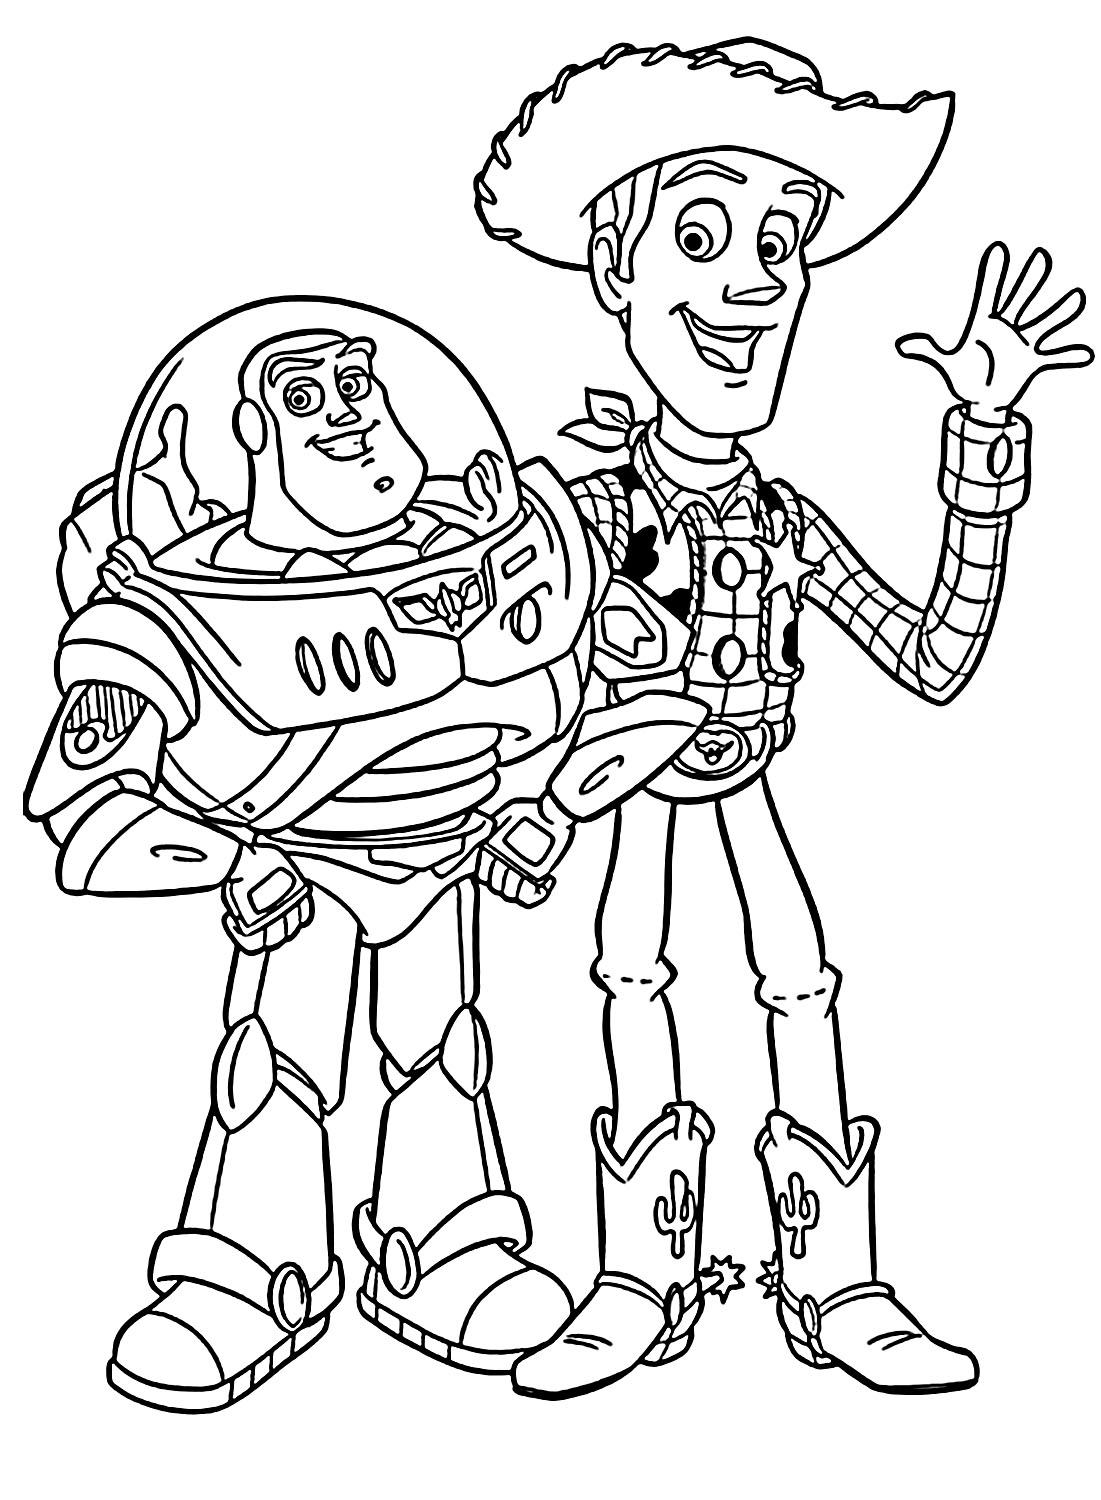 Woody and Buzz from Buzz Lightyear